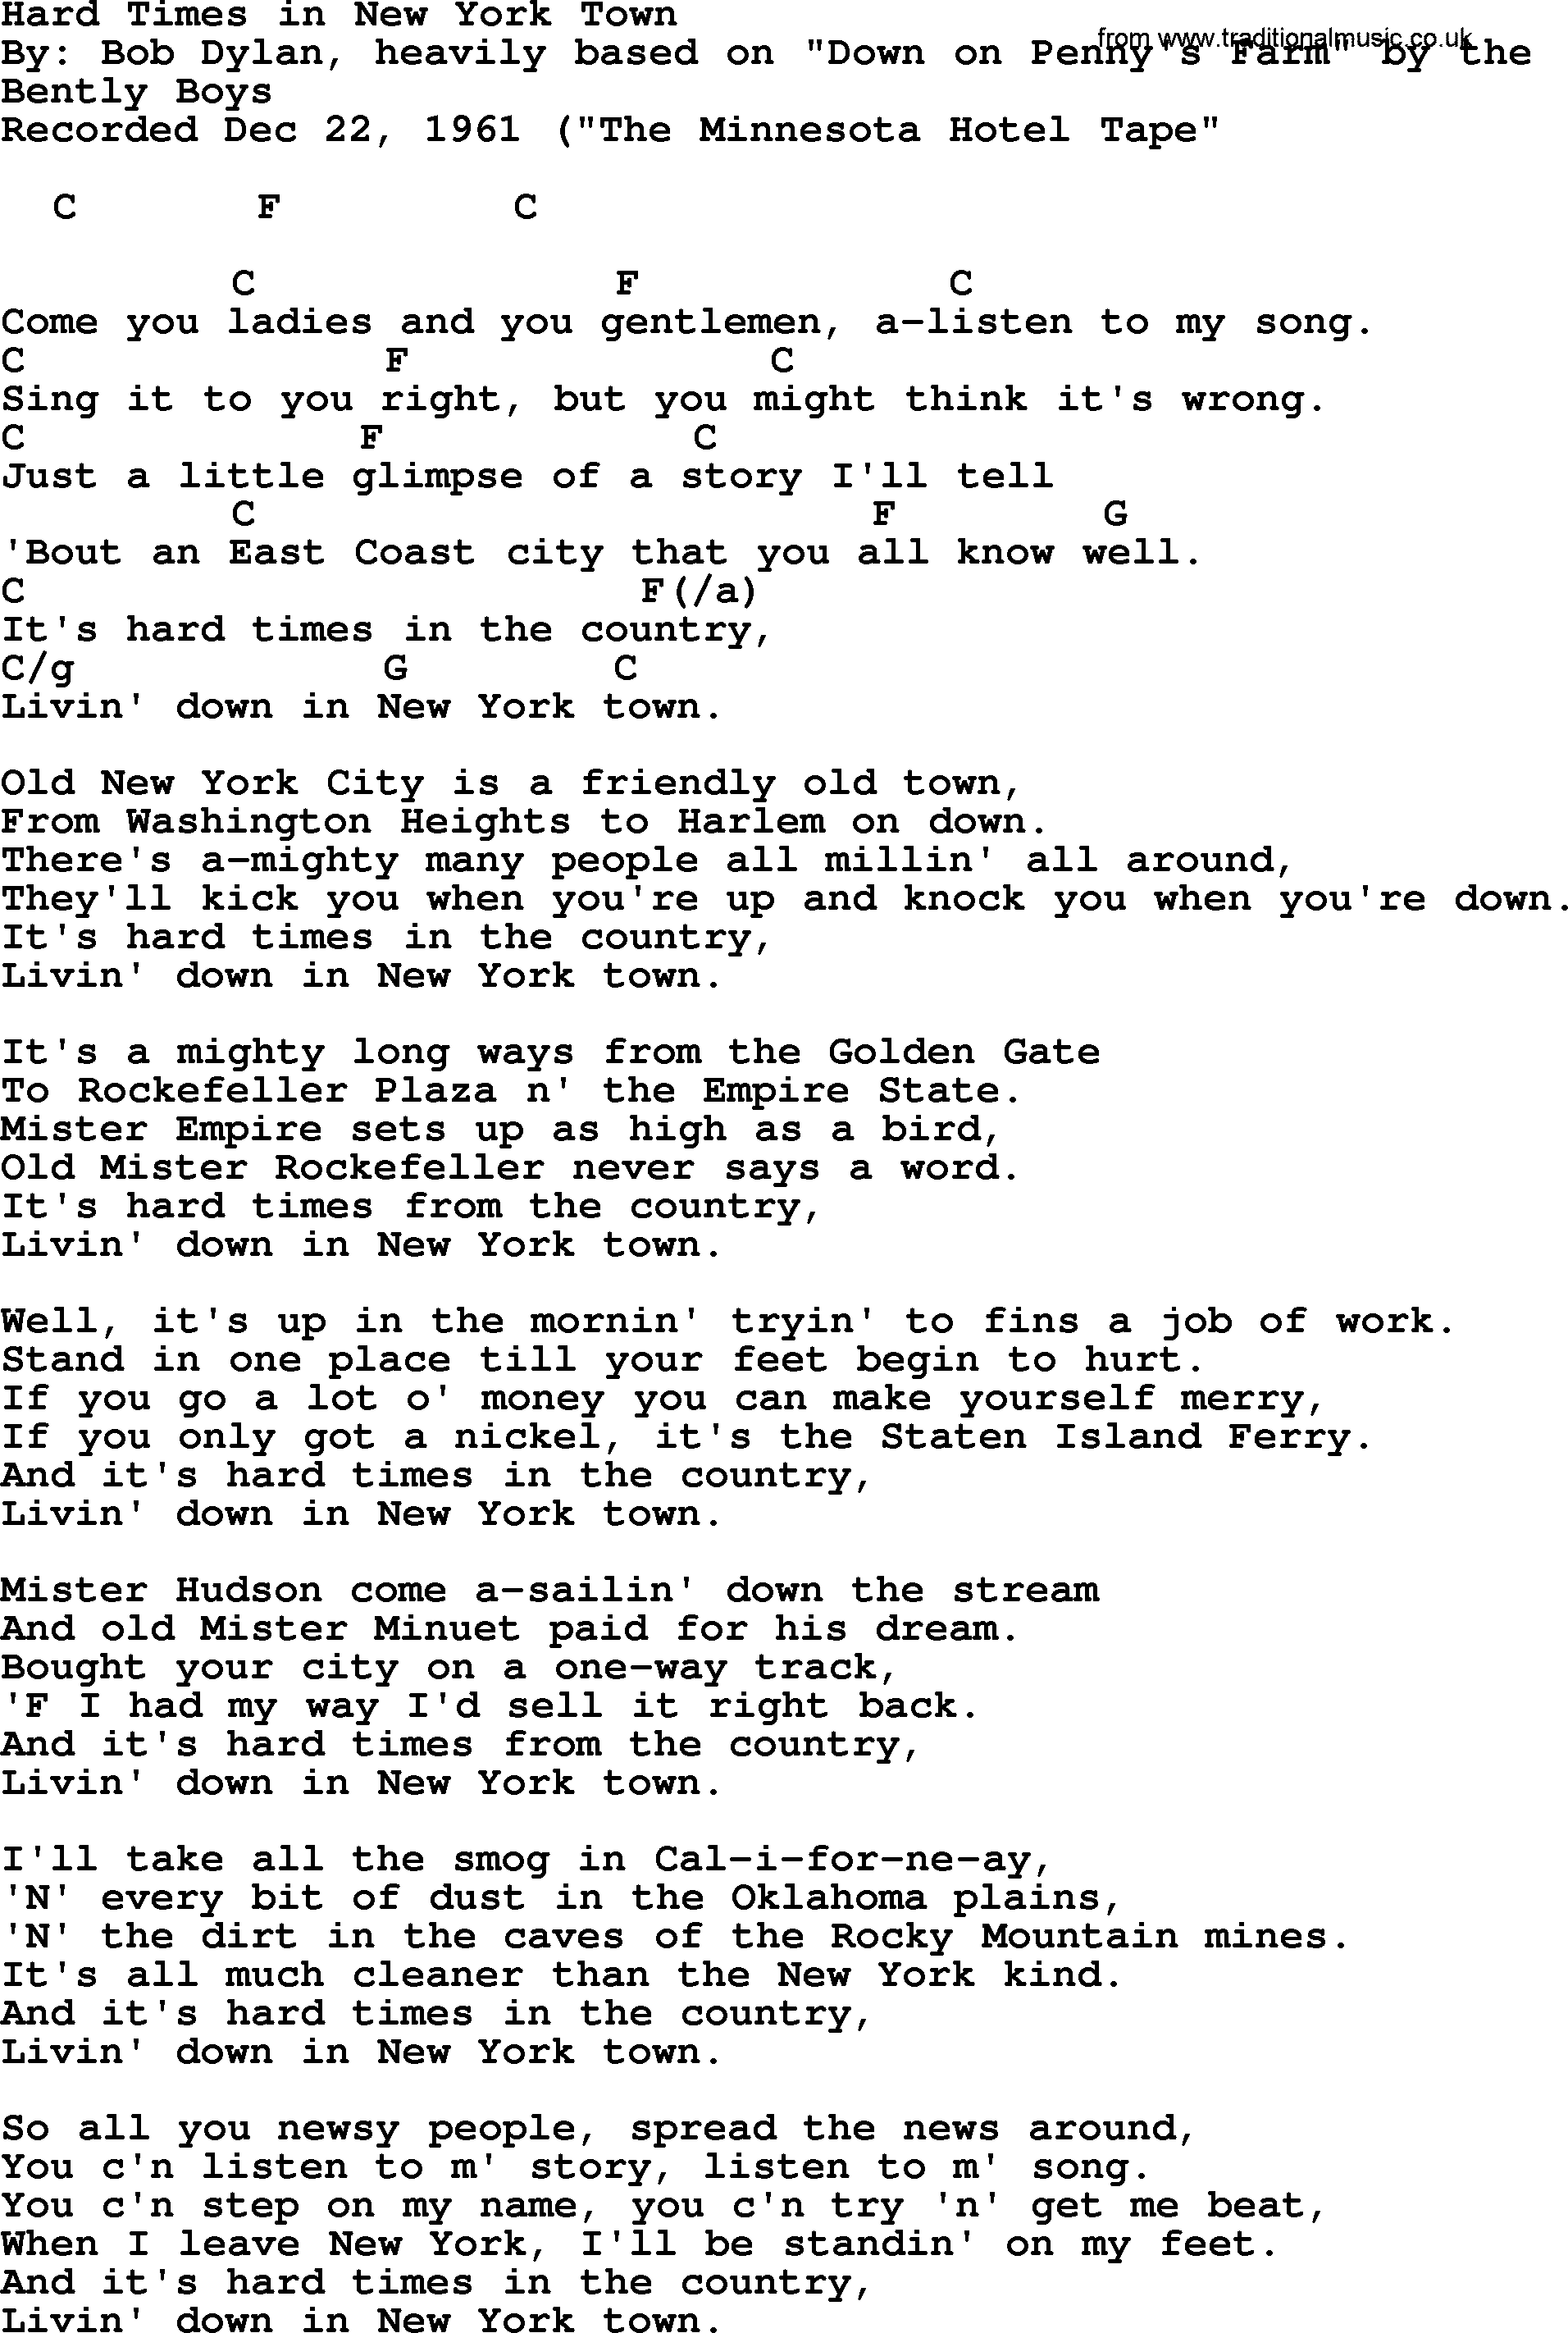 Bob Dylan song, lyrics with chords - Hard Times in New York Town